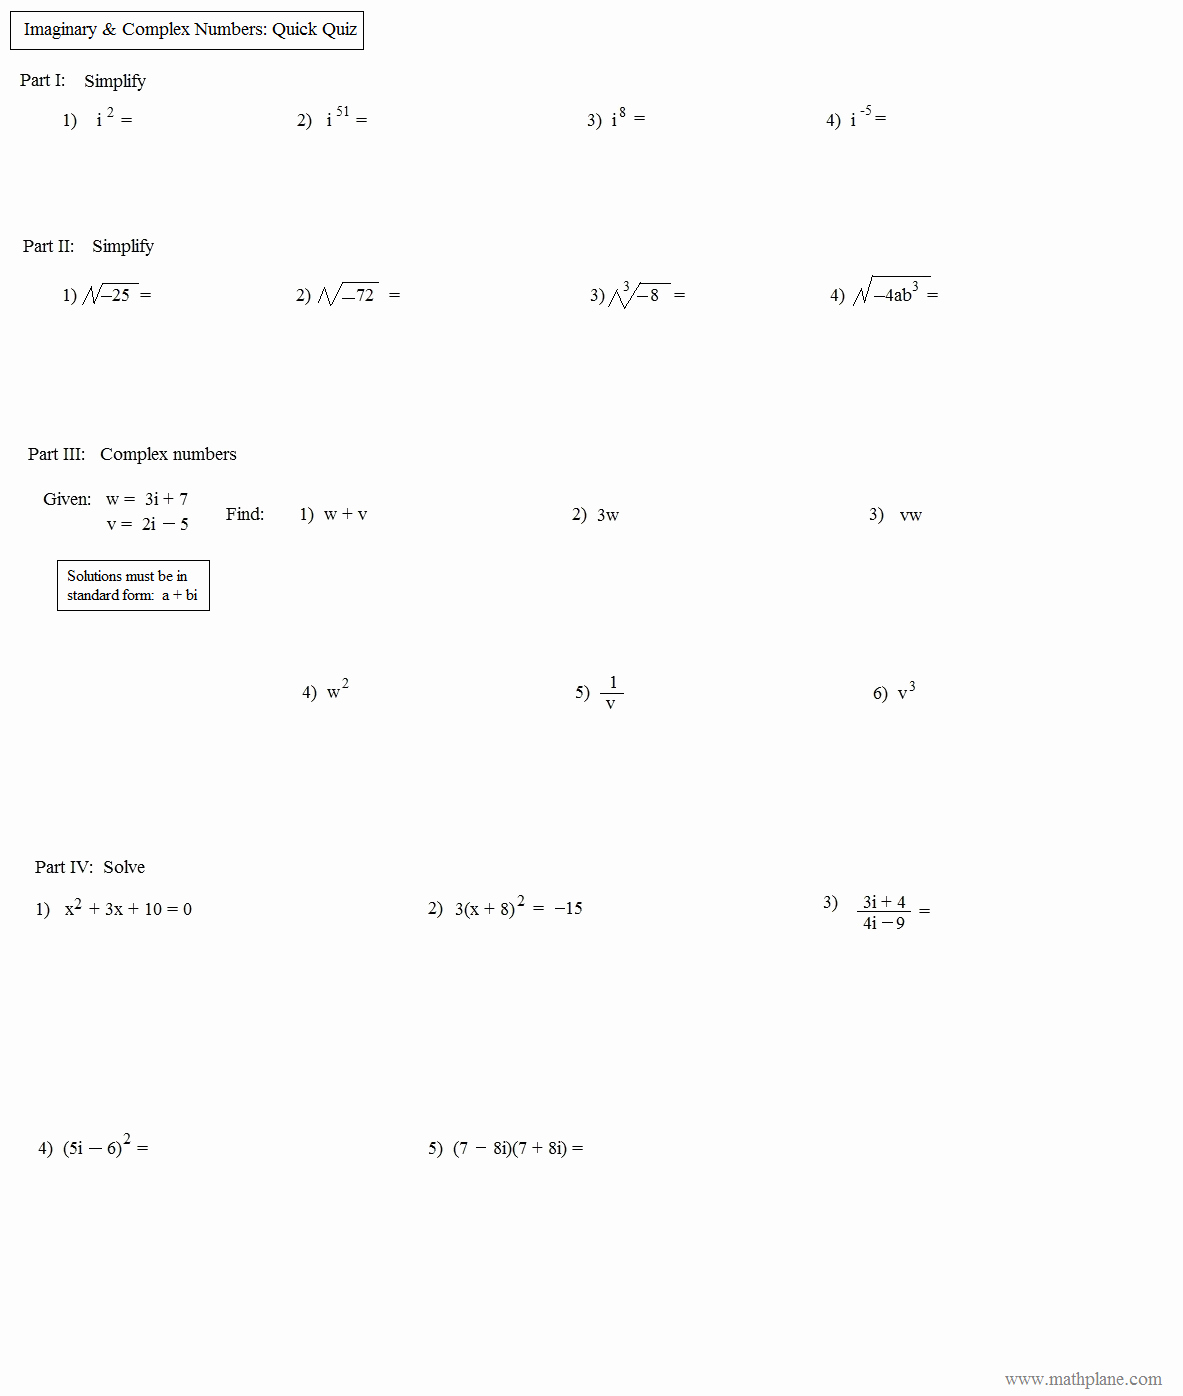 Complex Numbers Worksheet Pdf Awesome Math Plane Imaginary and Plex Numbers